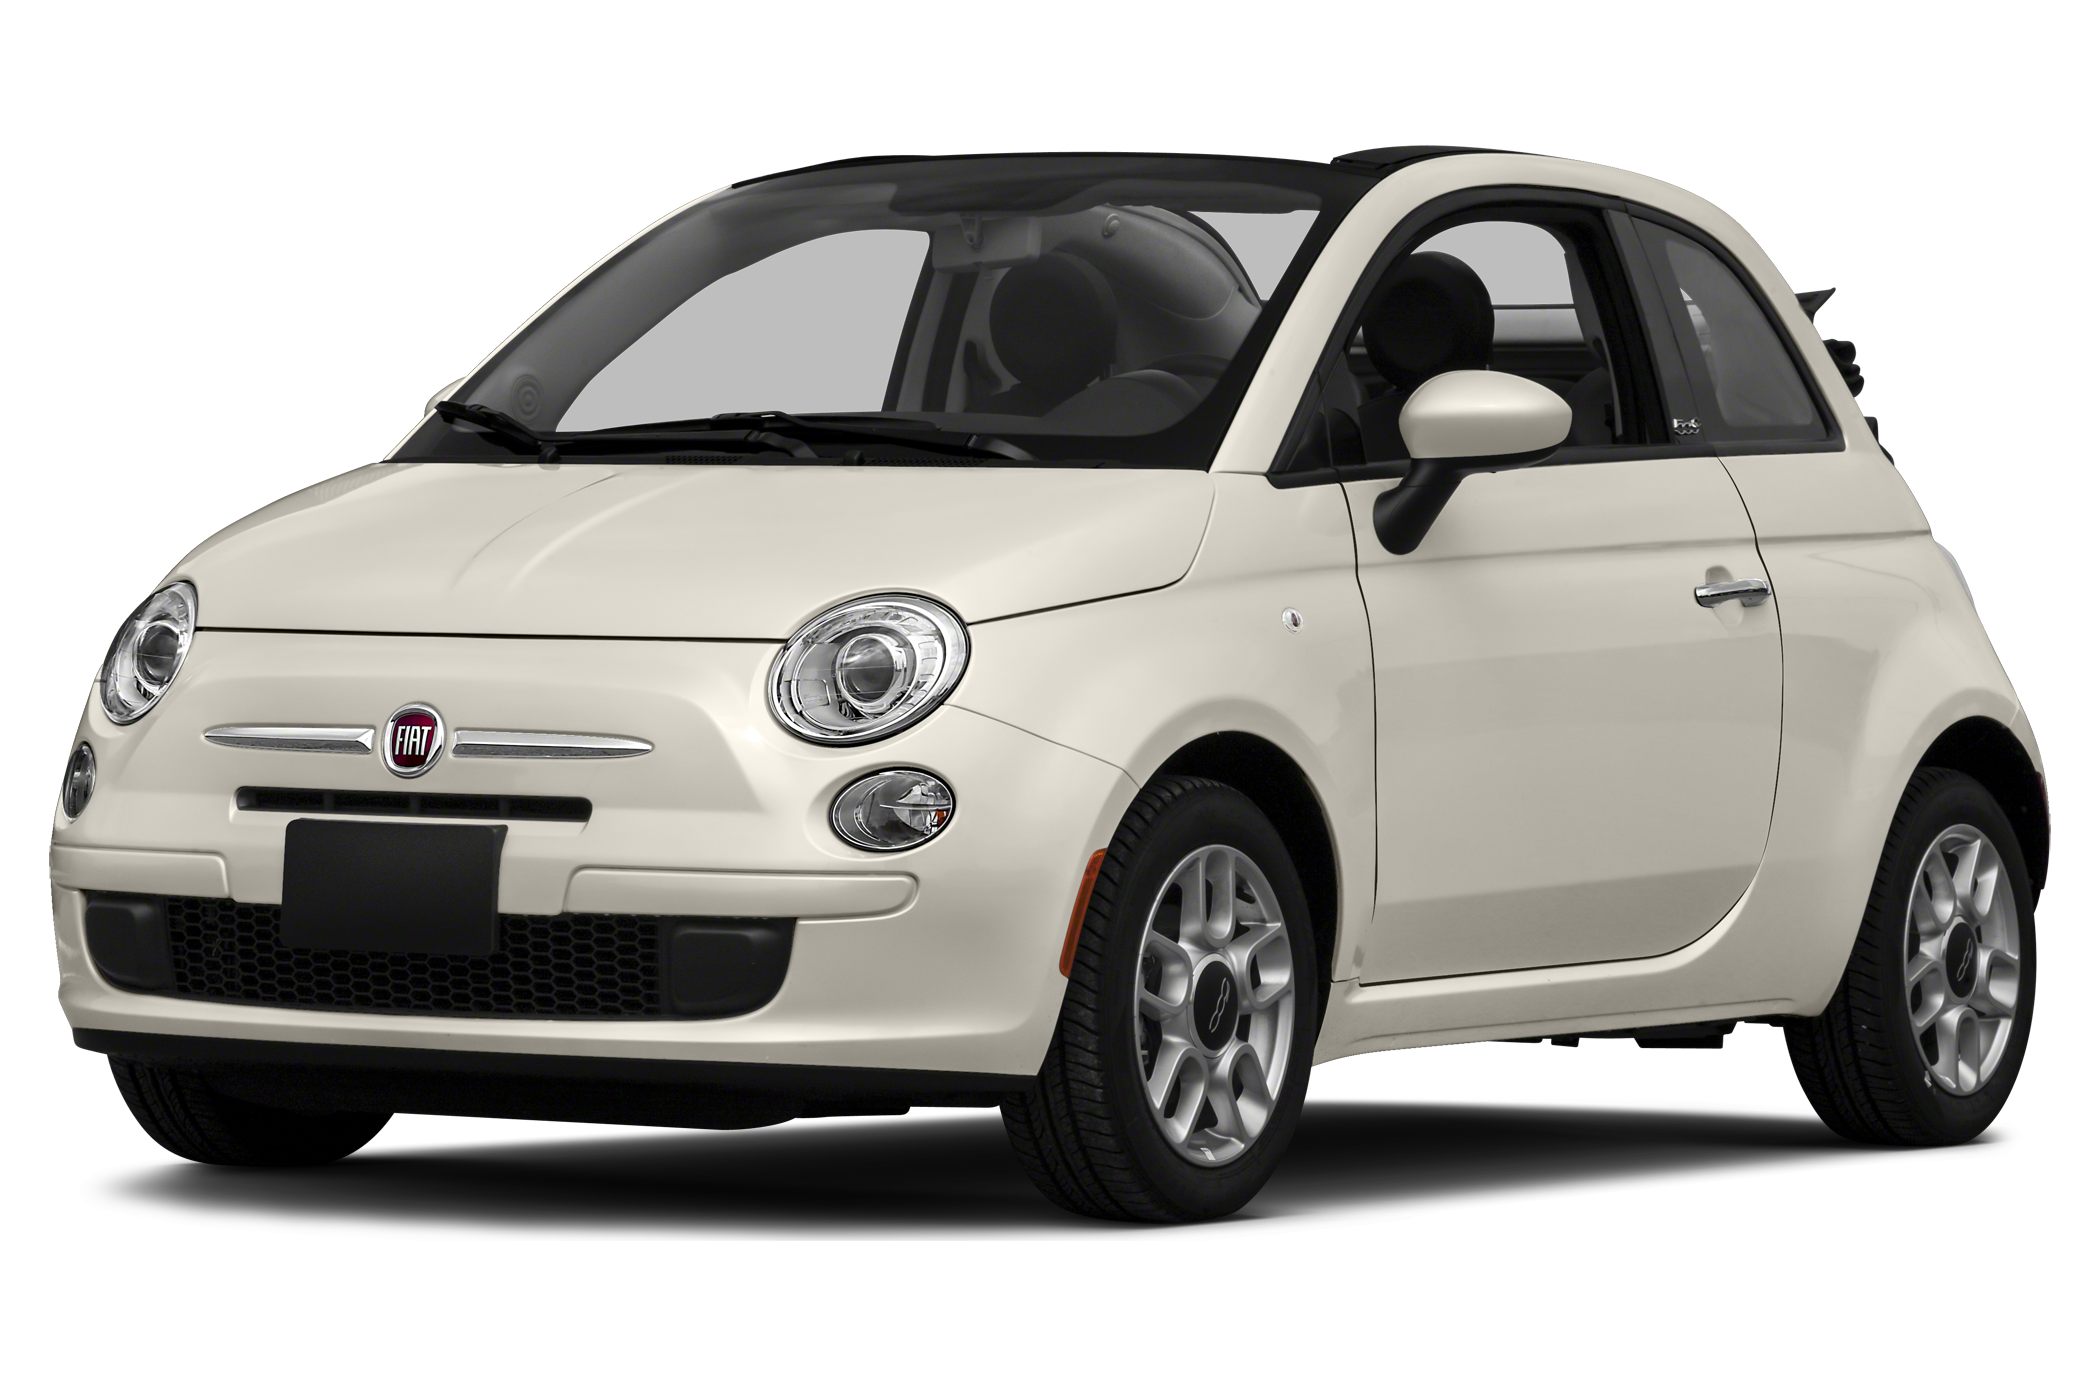 13 Fiat 500c Safety Features